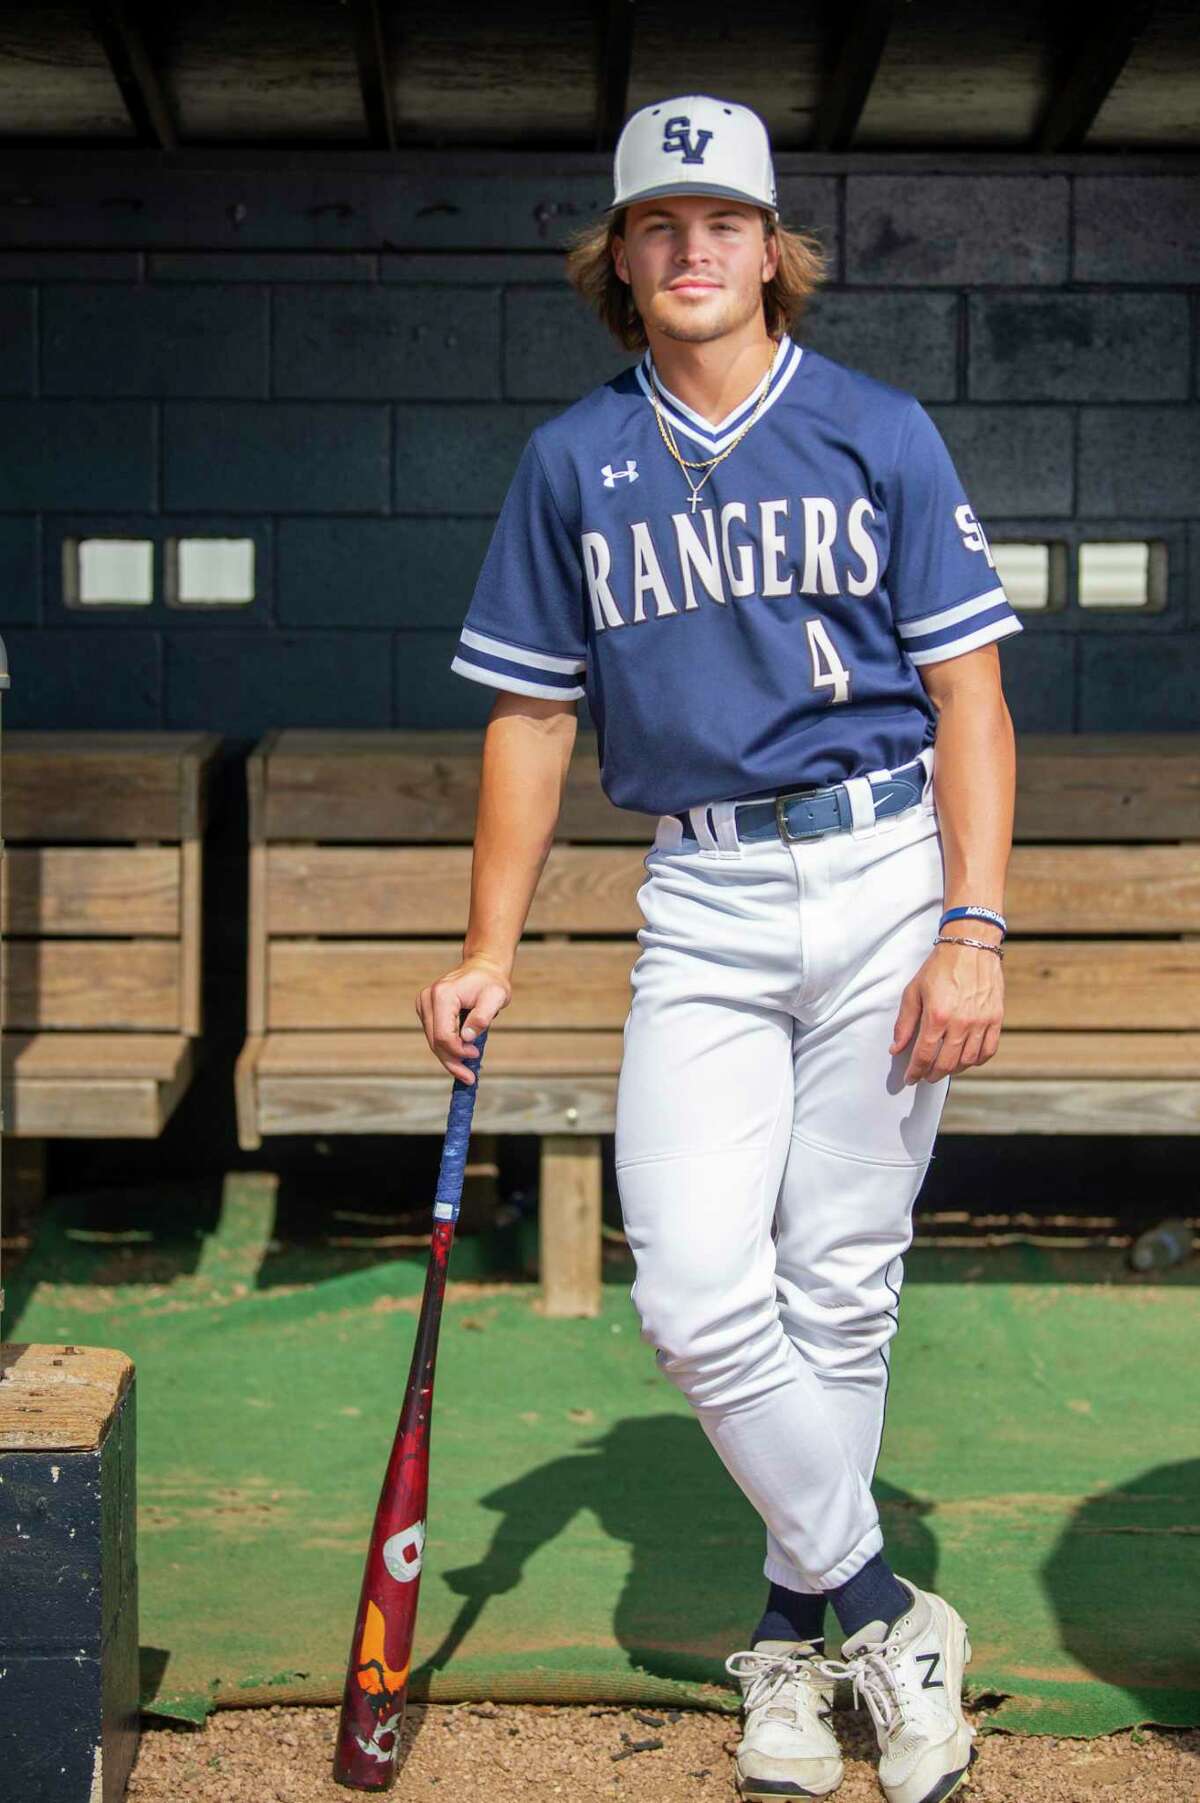 San Antonio Express-News Player of the Year, Kasen Wells, is going to play baseball at Texas A&M this fall.